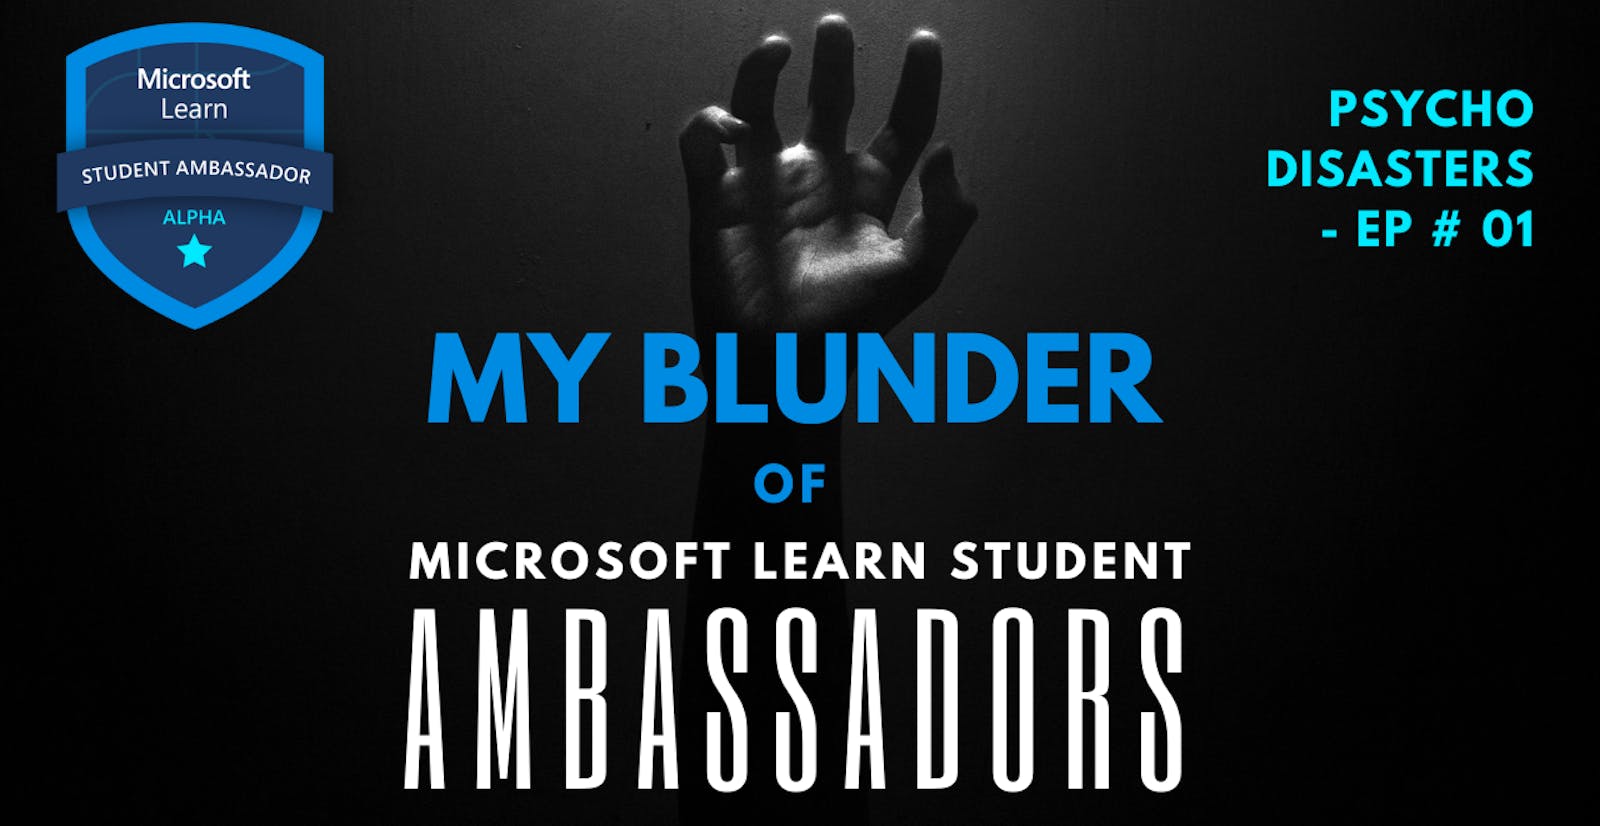 My Blunder of Microsoft Learn Student Ambassadors - Psycho Disasters Episode # 01